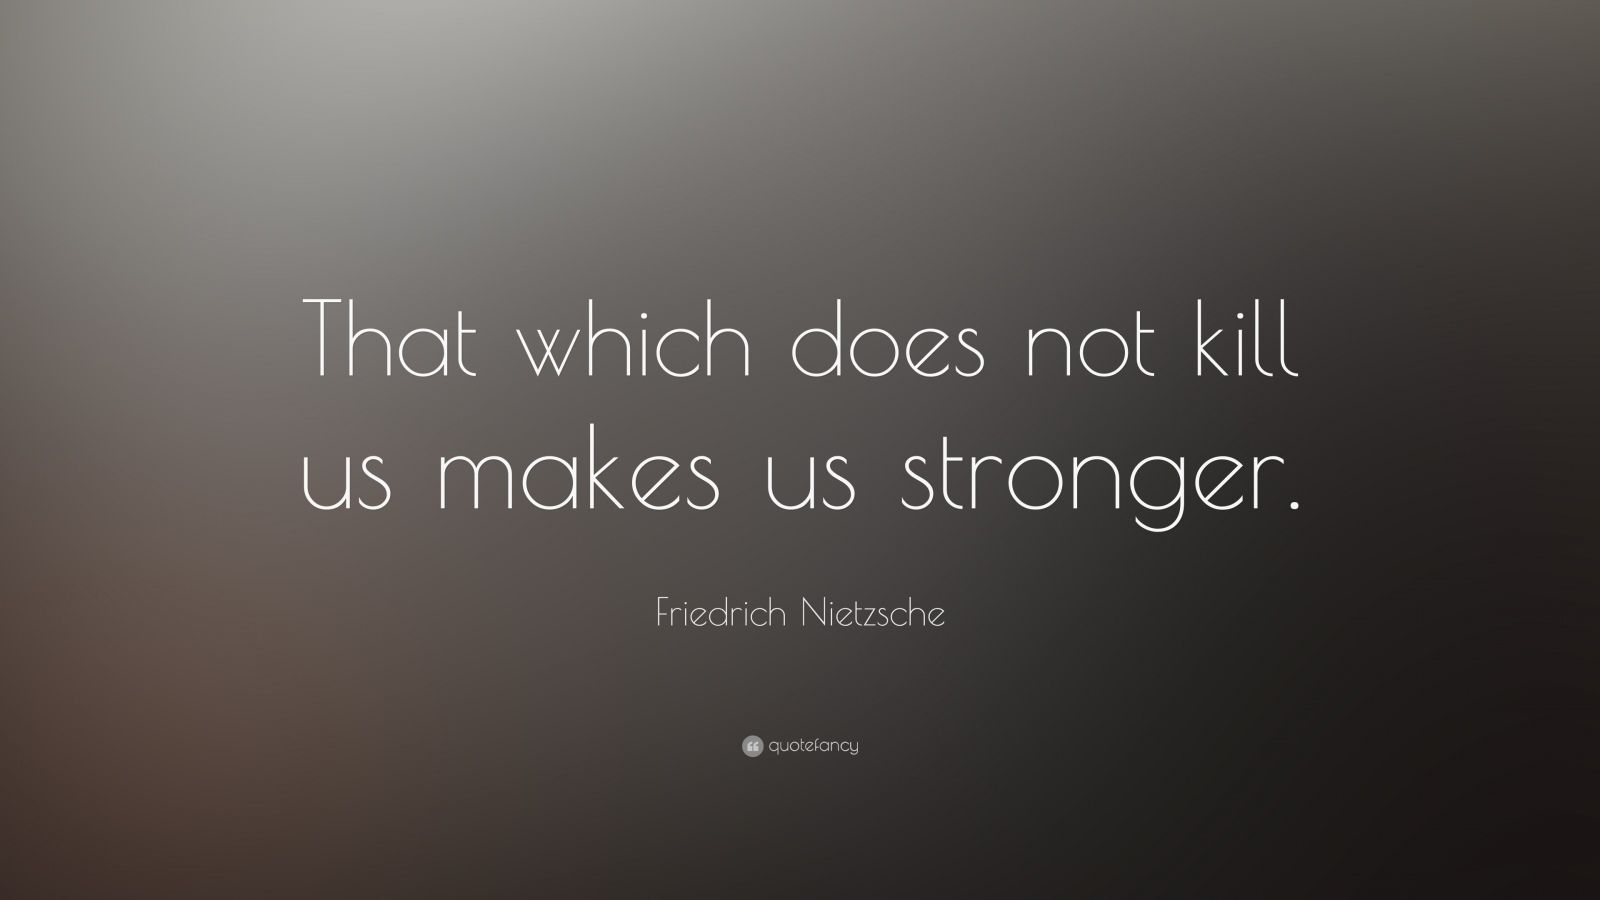 Friedrich Nietzsche Quote: “That which does not kill us makes us stronger.” (28 ...1600 x 900